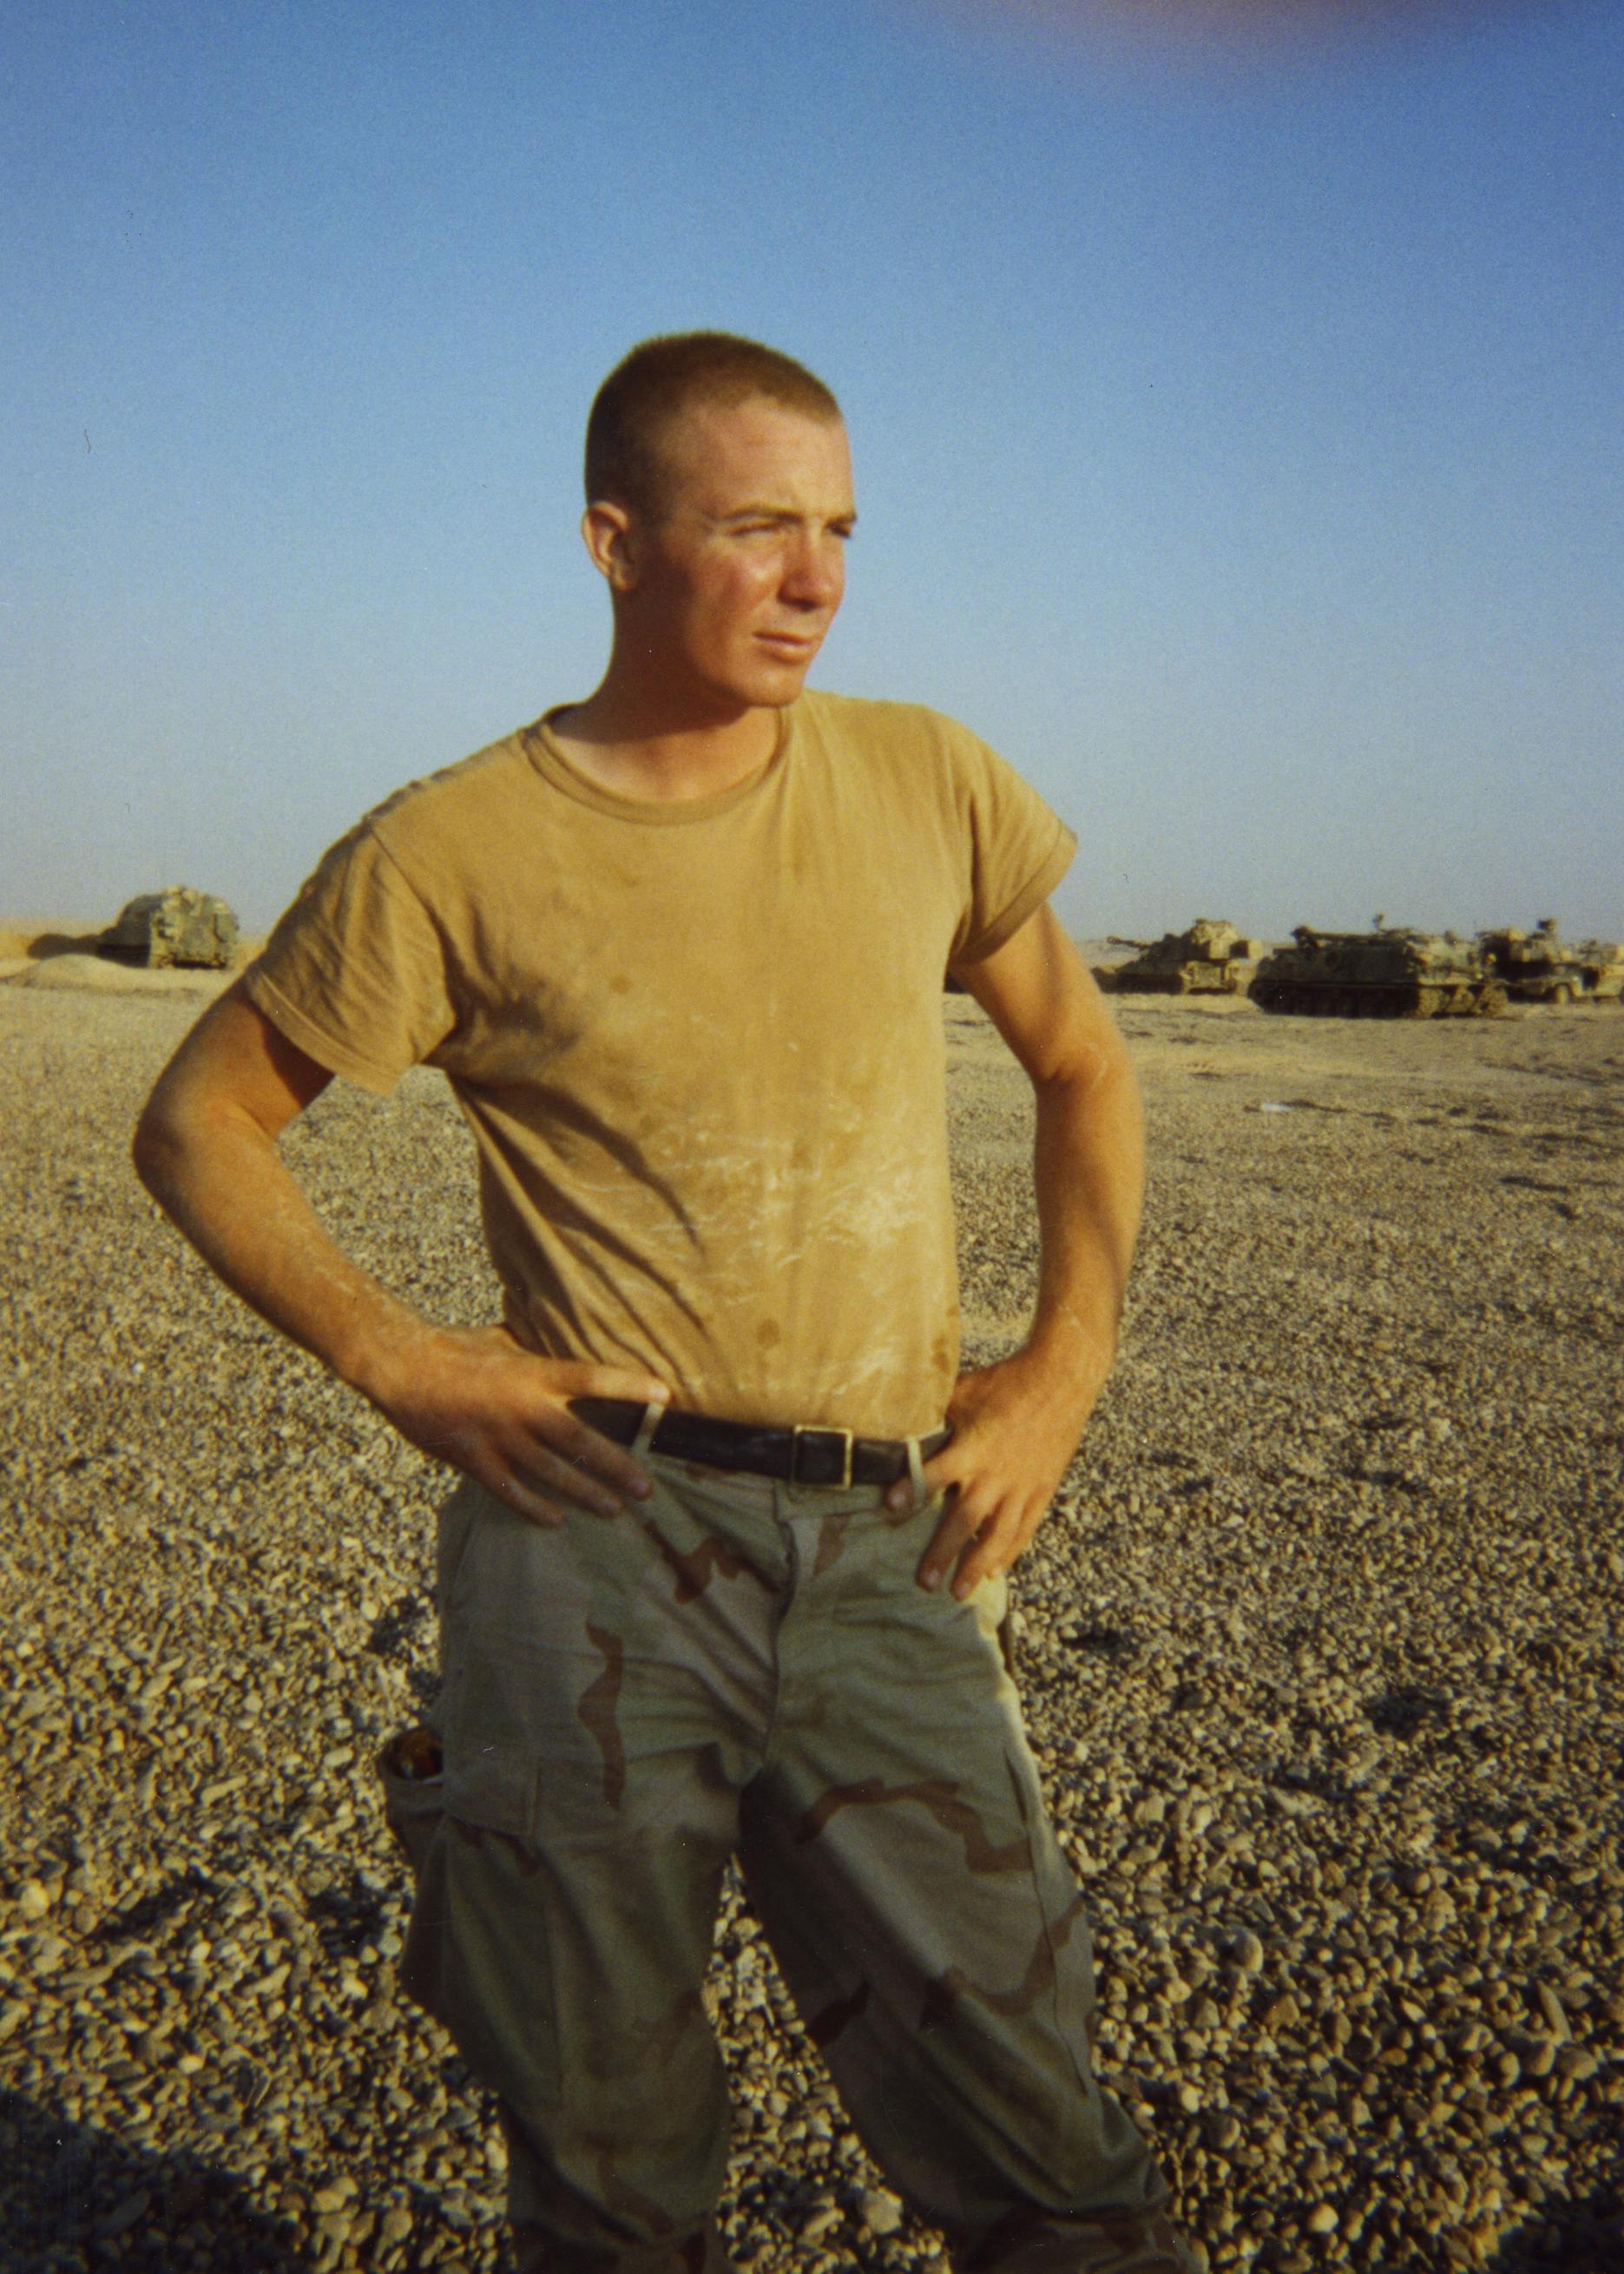 photo of soldier in tshirt in desert environment